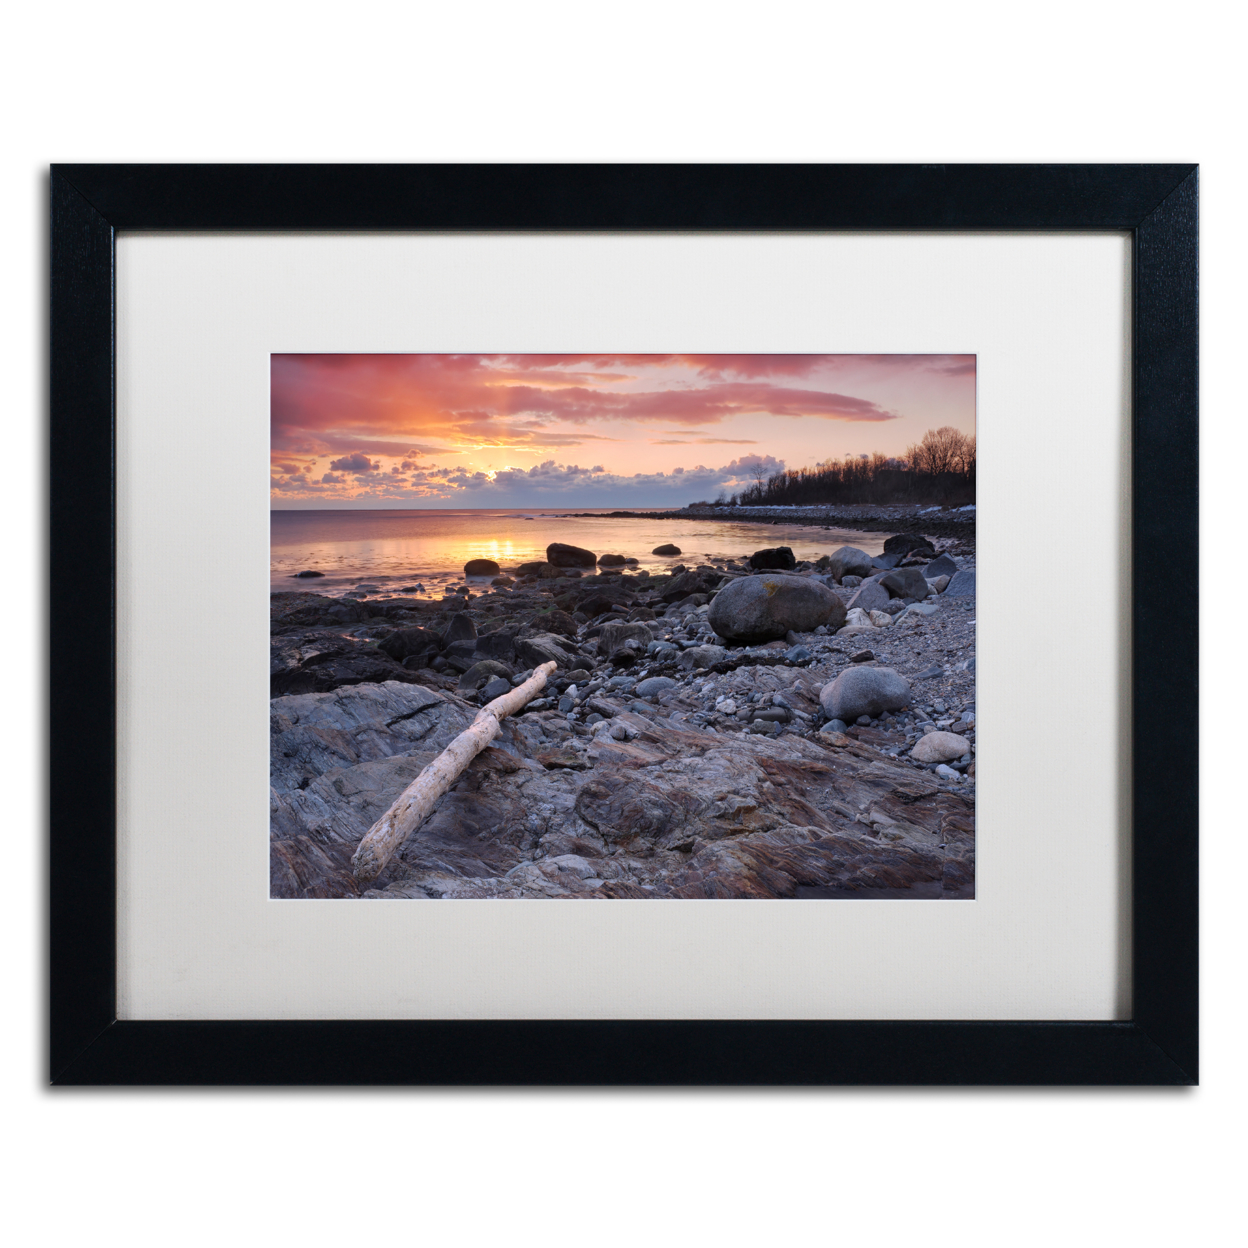 Michael Blanchette Photography 'Pointer To The Sun' Black Wooden Framed Art 18 X 22 Inches